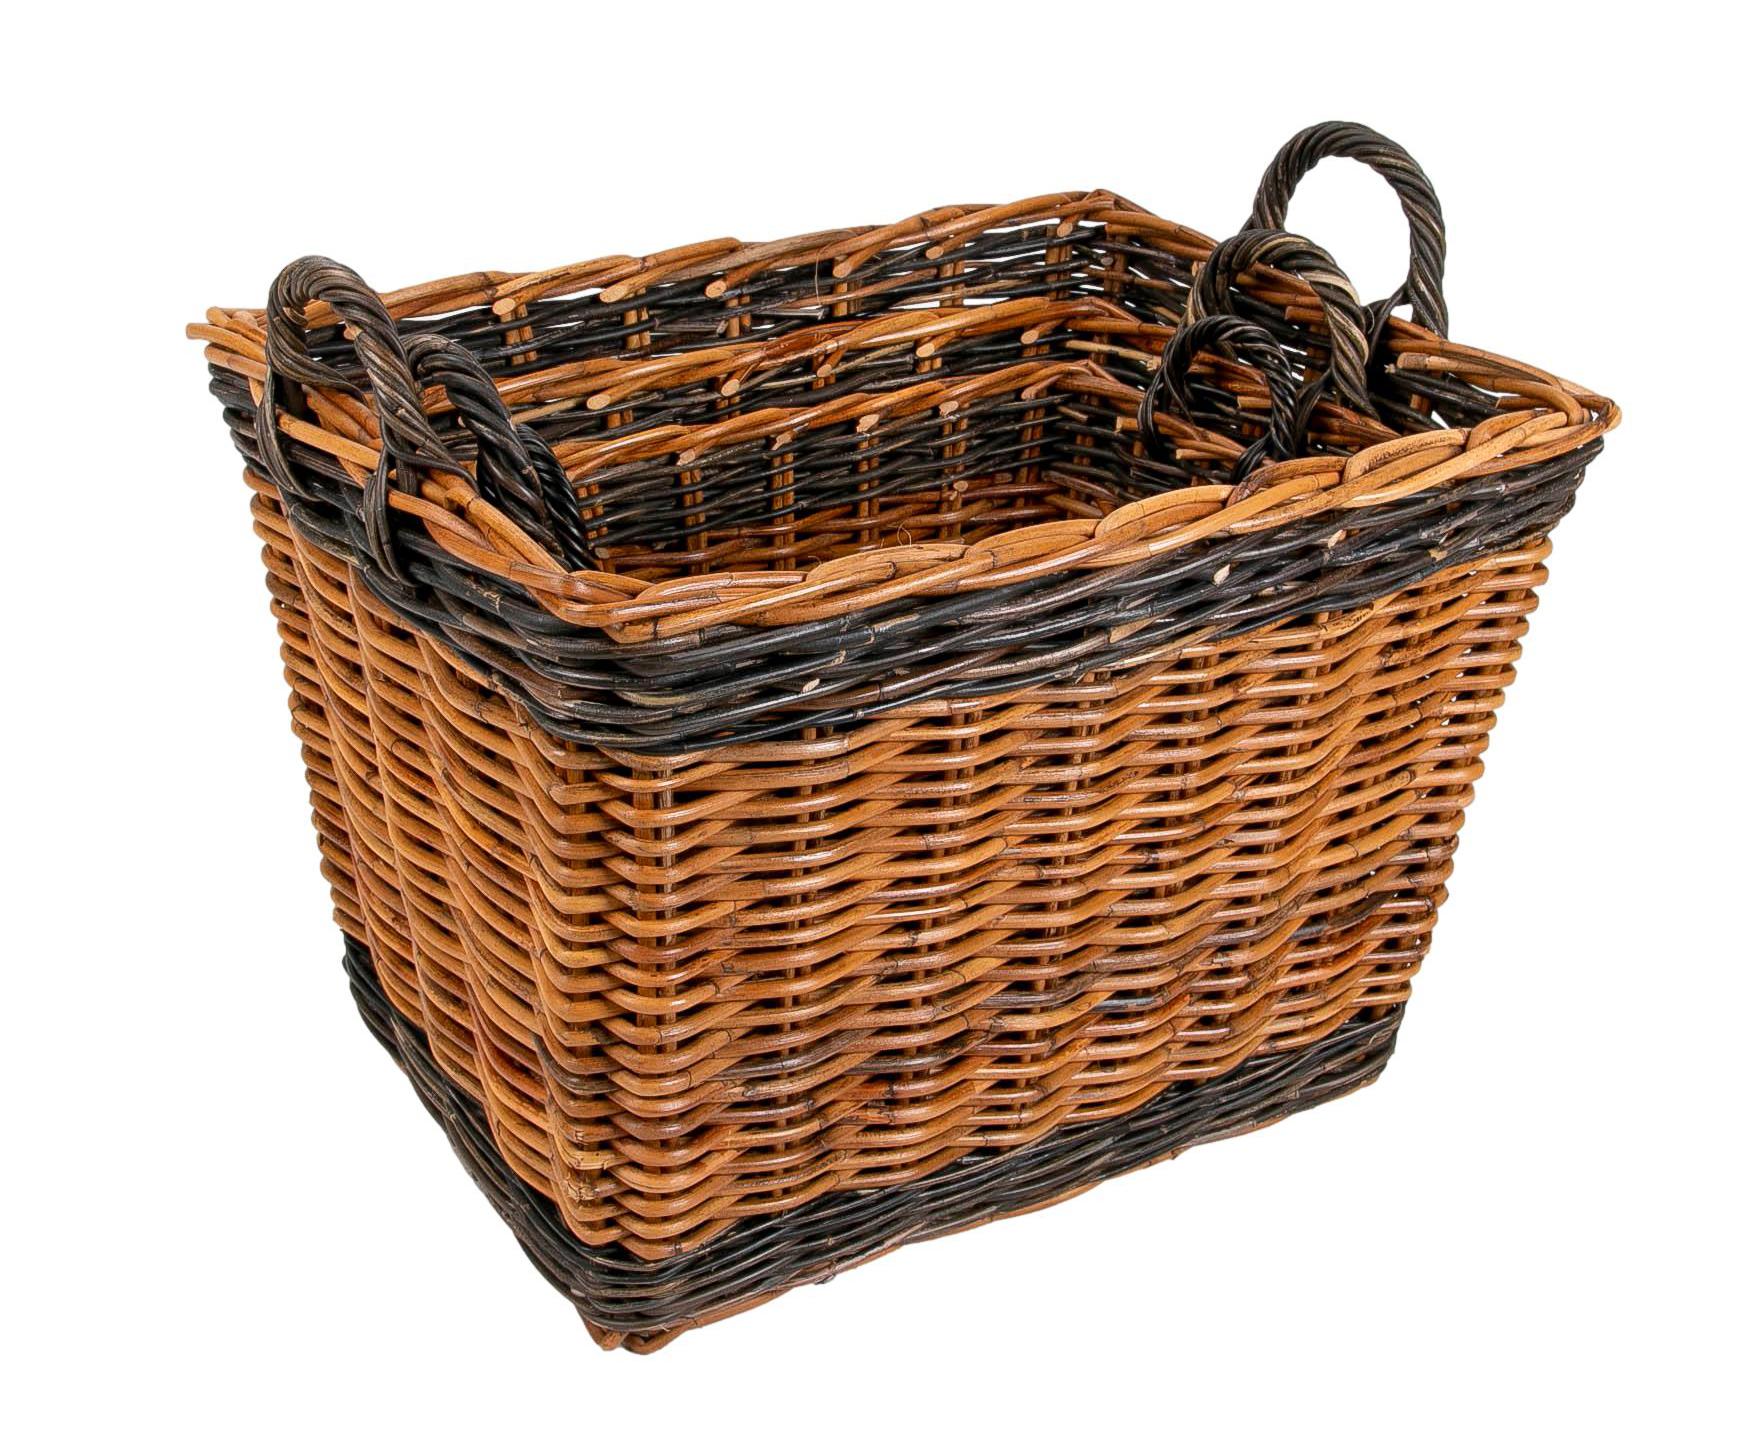 Contemporary Set Consisting of Three Decorative Wicker Baskets of Different Sizes For Sale